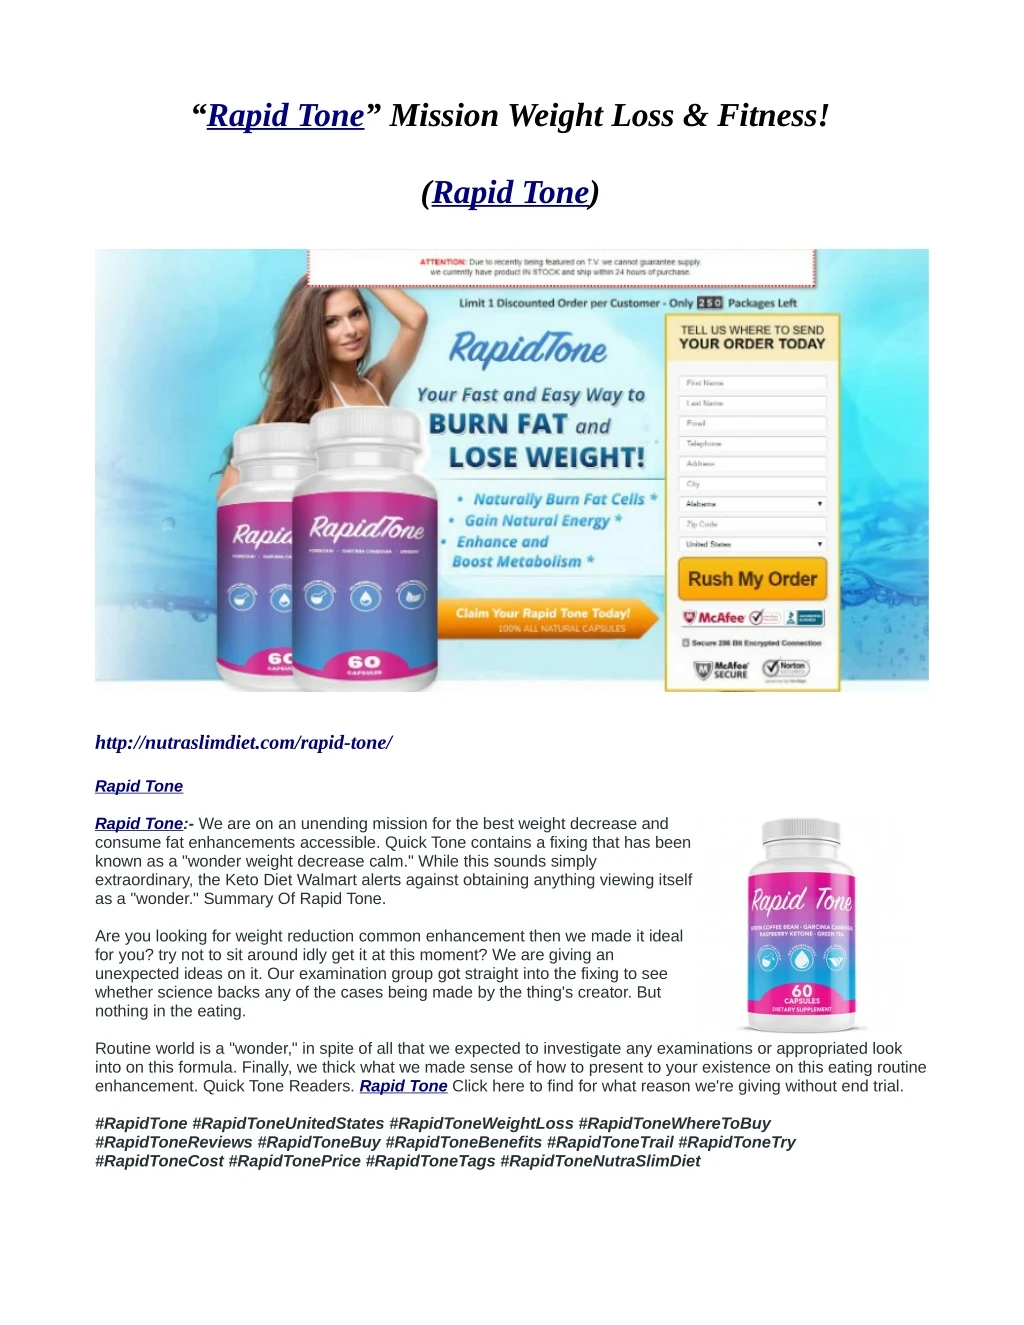 rapid tone mission weight loss fitness